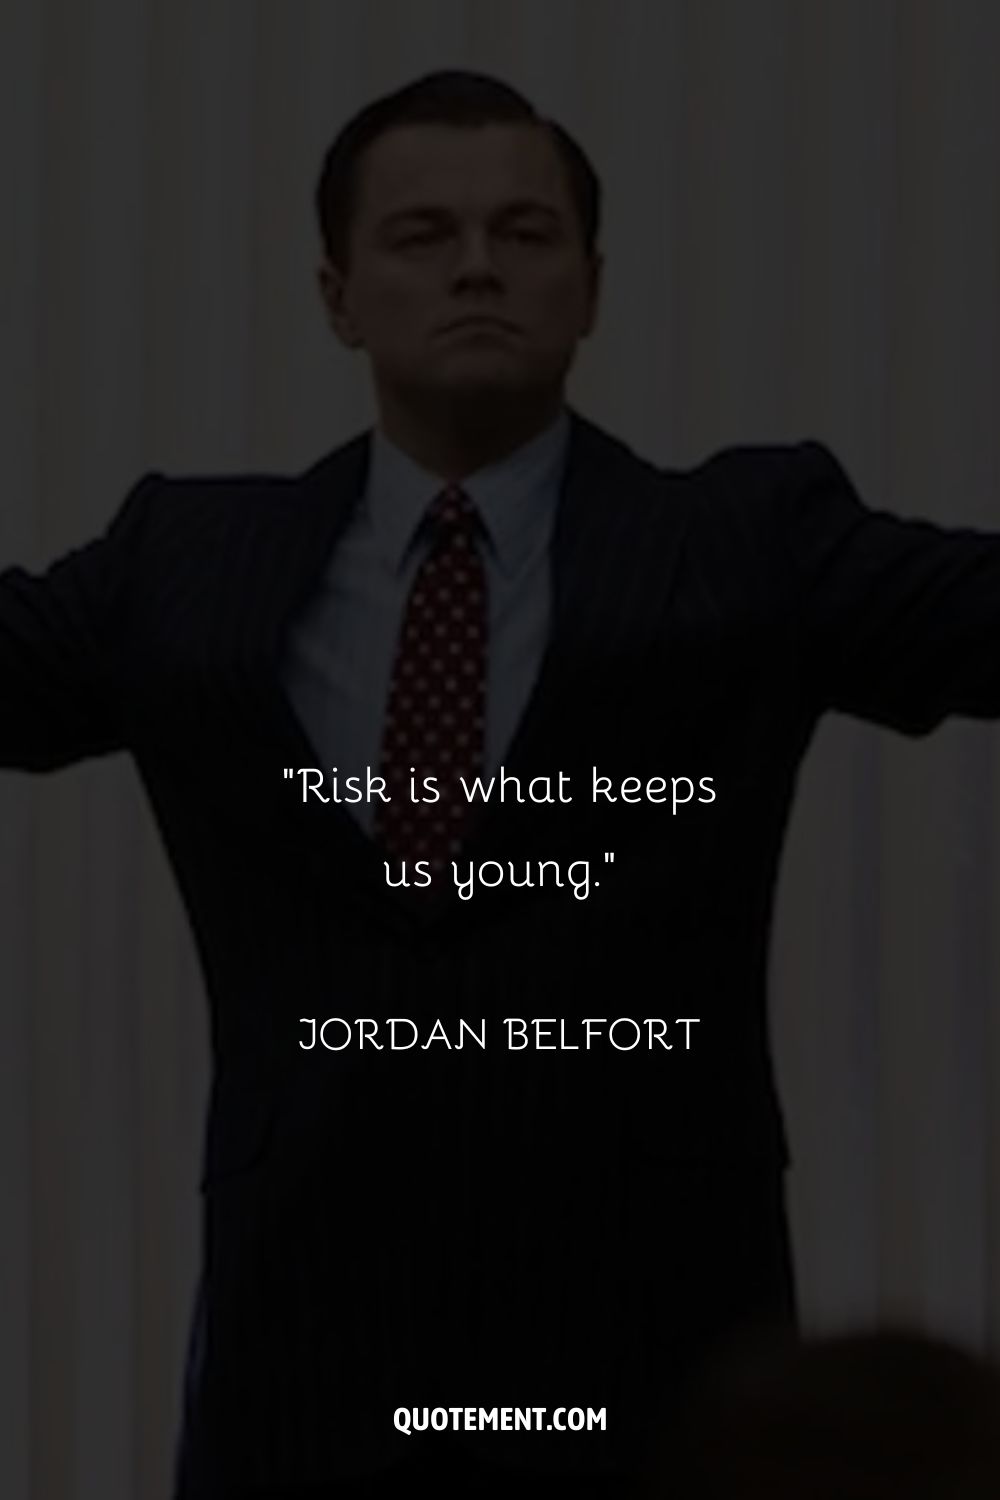 Leonardo DiCaprio's magnetic presence representing wolf of wall street sales quote
